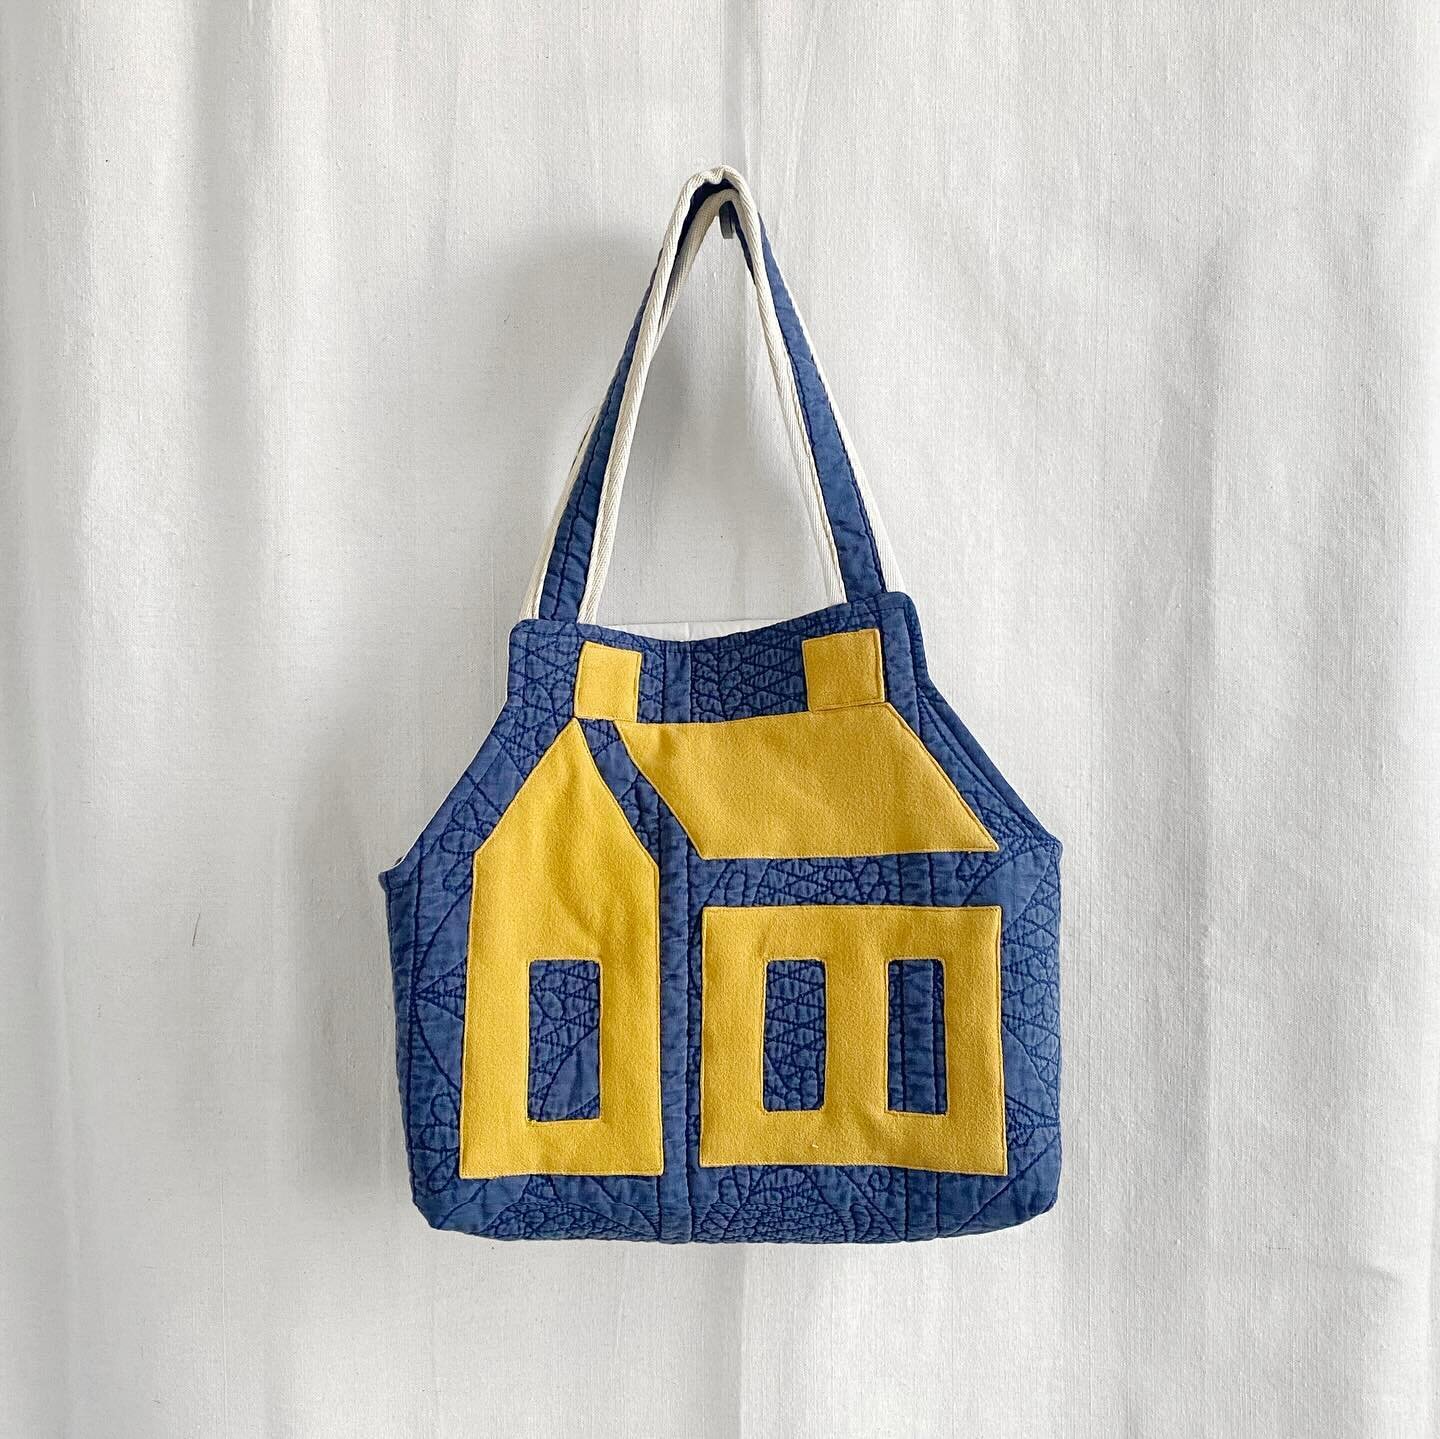 I&rsquo;ve been juggling many things lately but finally I got few new stuff done! It&rsquo;s a one-person operation, so gotta be patient 😅Check this out - the schoolhouse shoulder bag

#wbthamm #madeinslc #handmade #renewedvintage #etsy #EtsyCreator